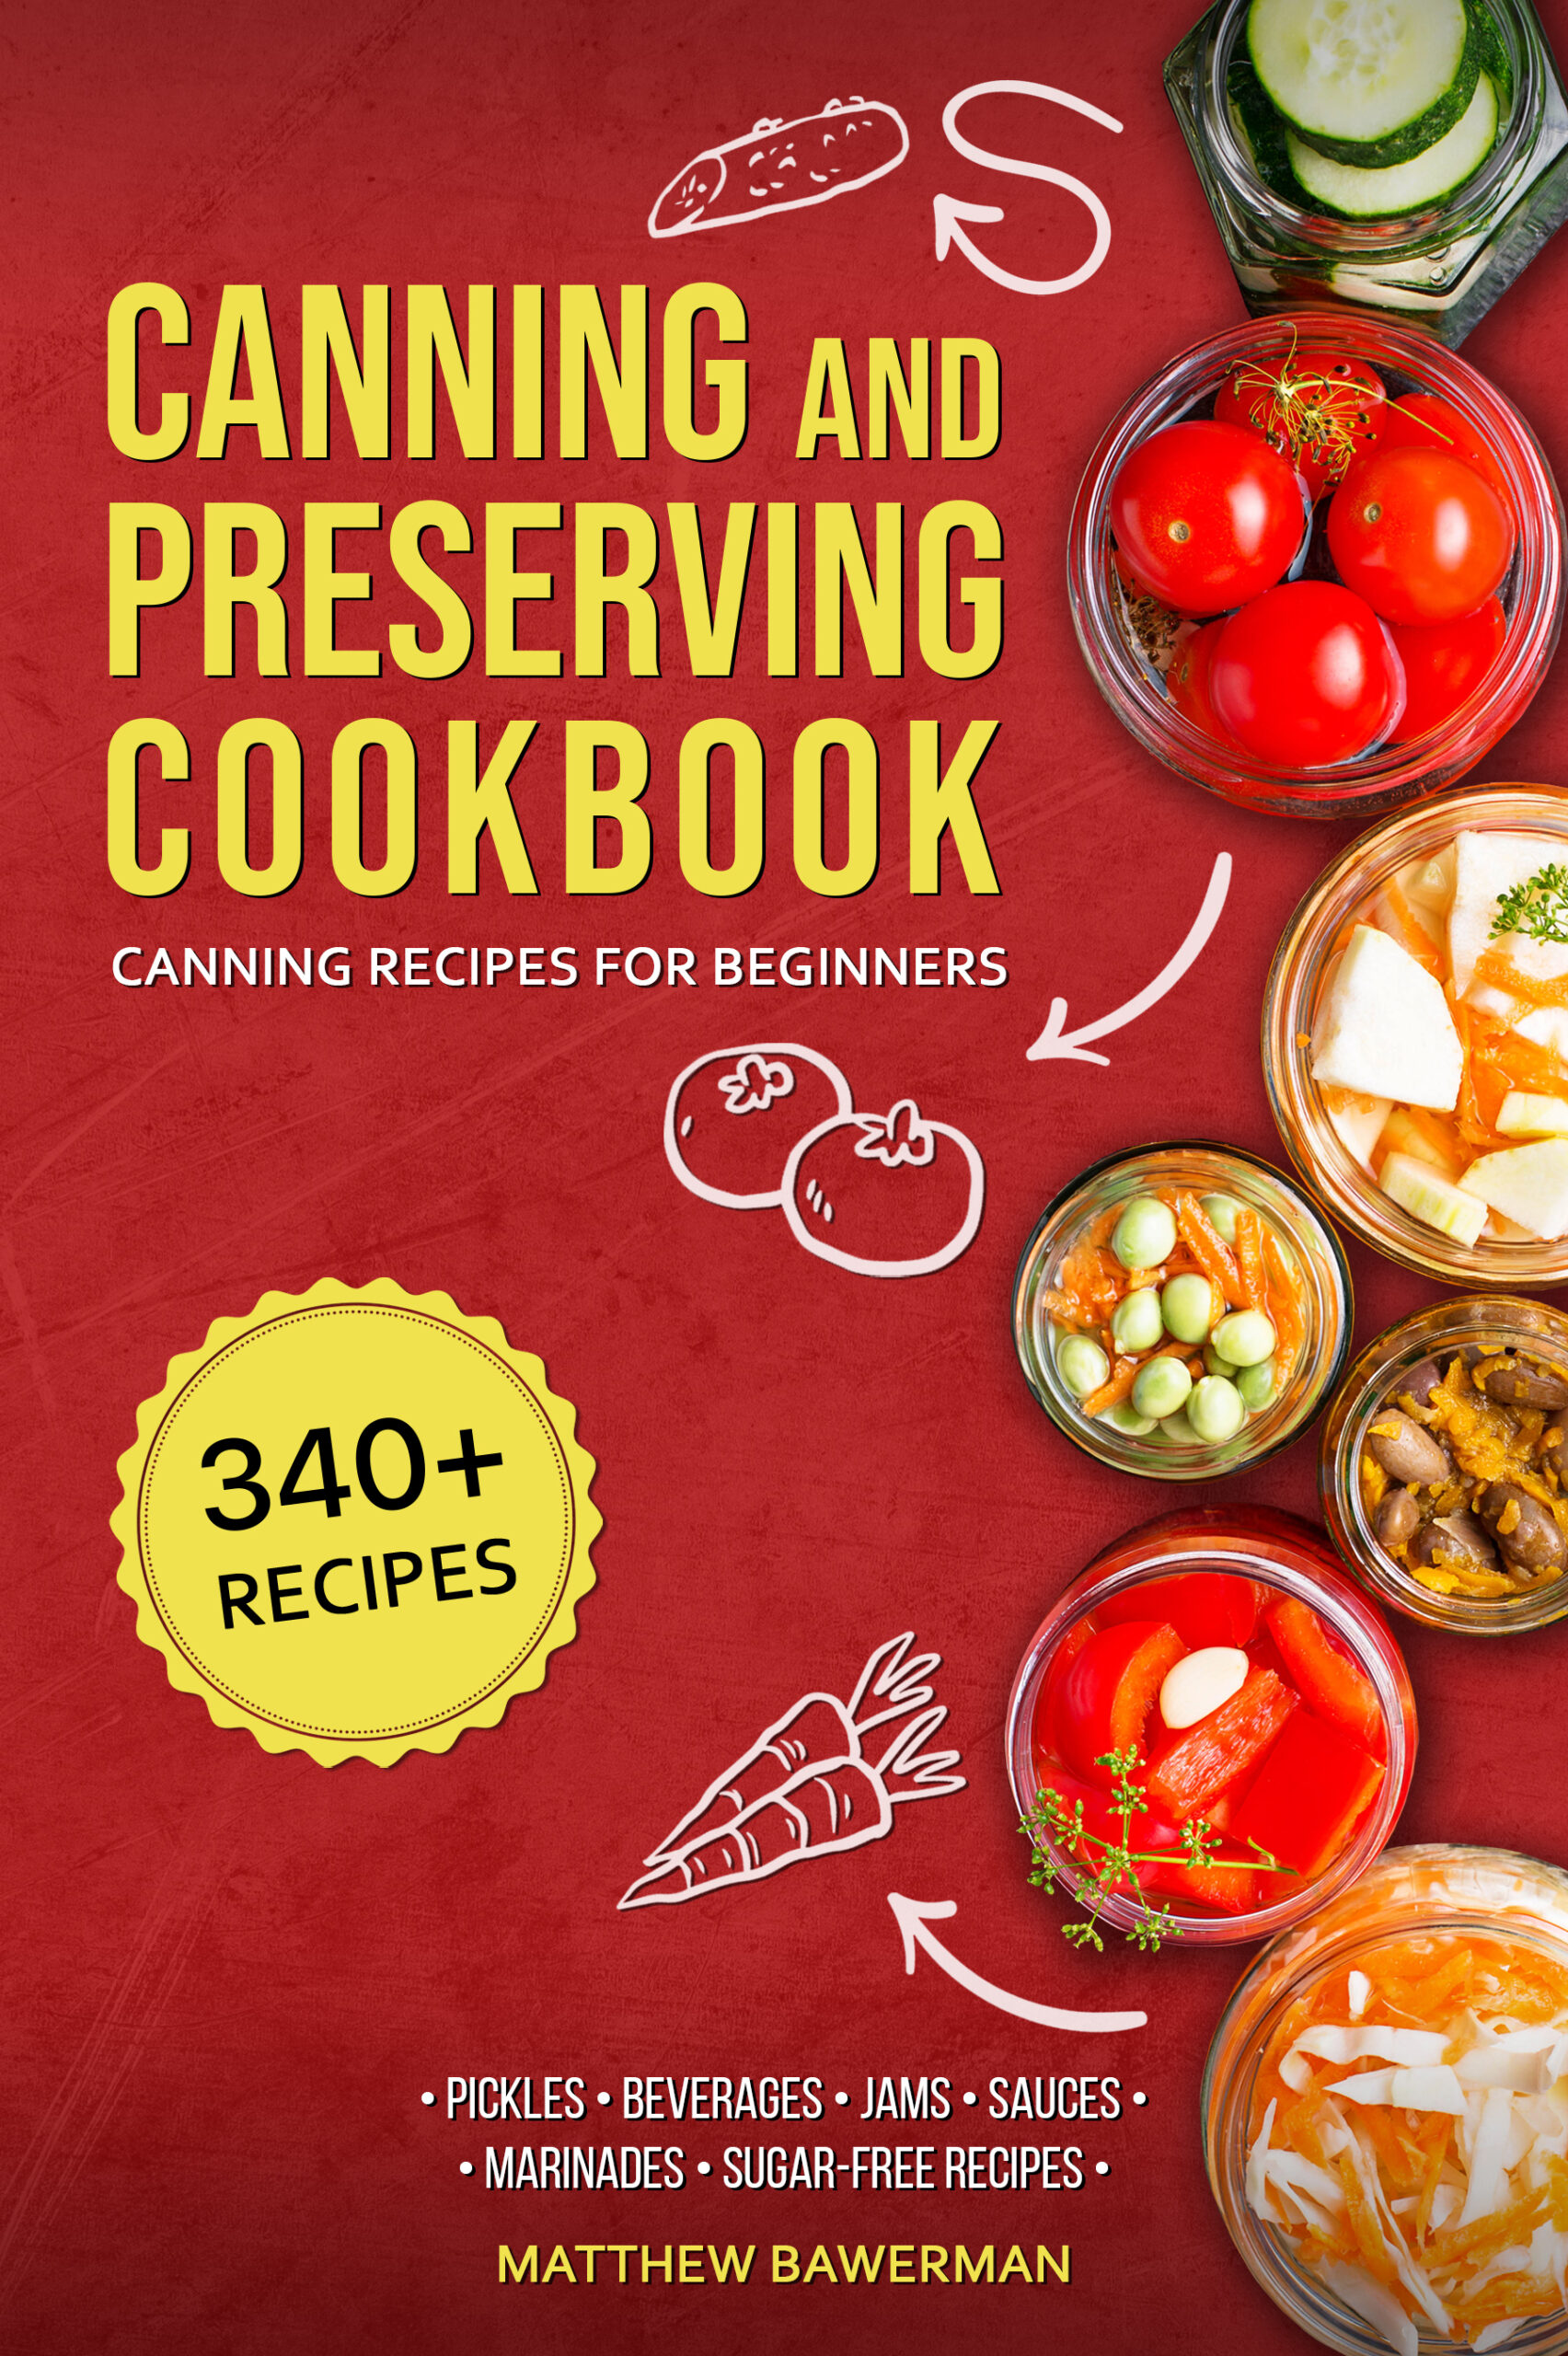 FREE: CANNING AND PRESERVING COOKBOOK by Matthew Bawerman